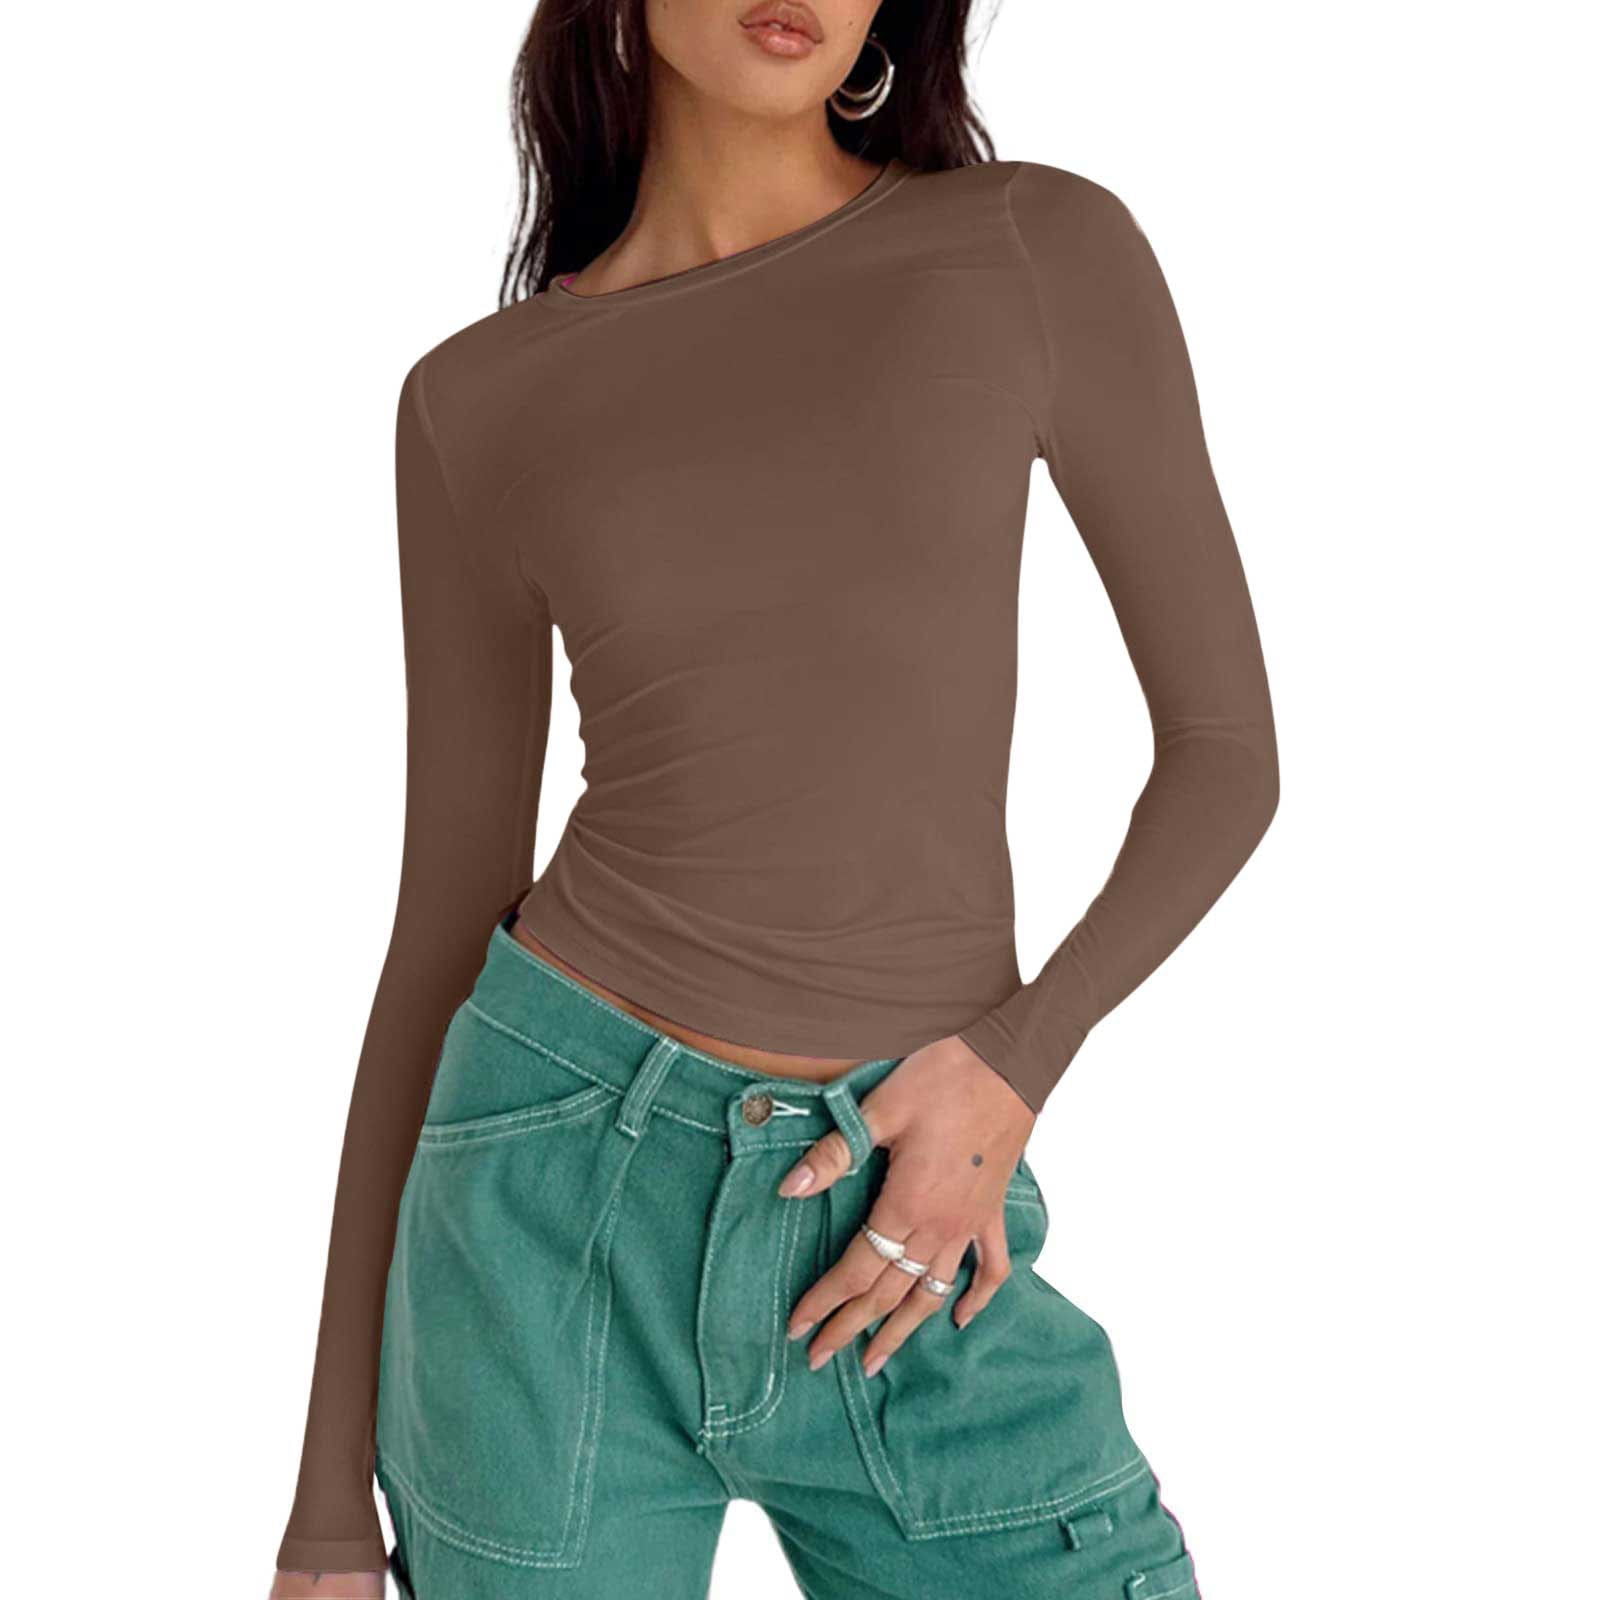 YYDGH Women's Slim Fit Going Out Crop Tops Casual Solid Color Crew